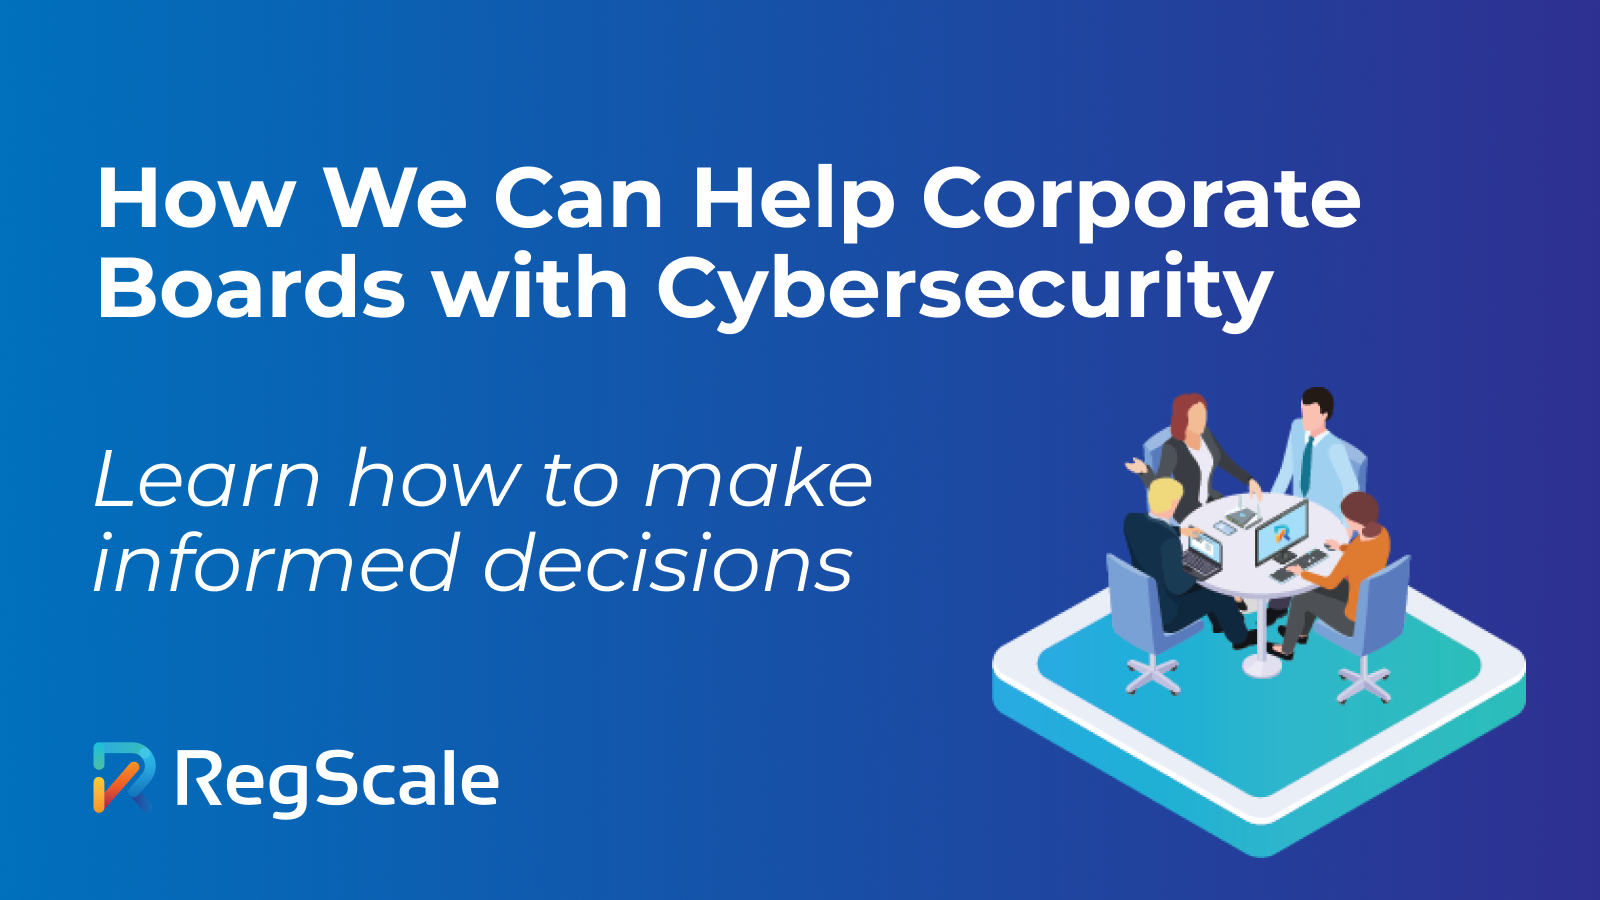 How We Can Help Corporate Boards with Cybersecurity. Learn how to make informed decisions.